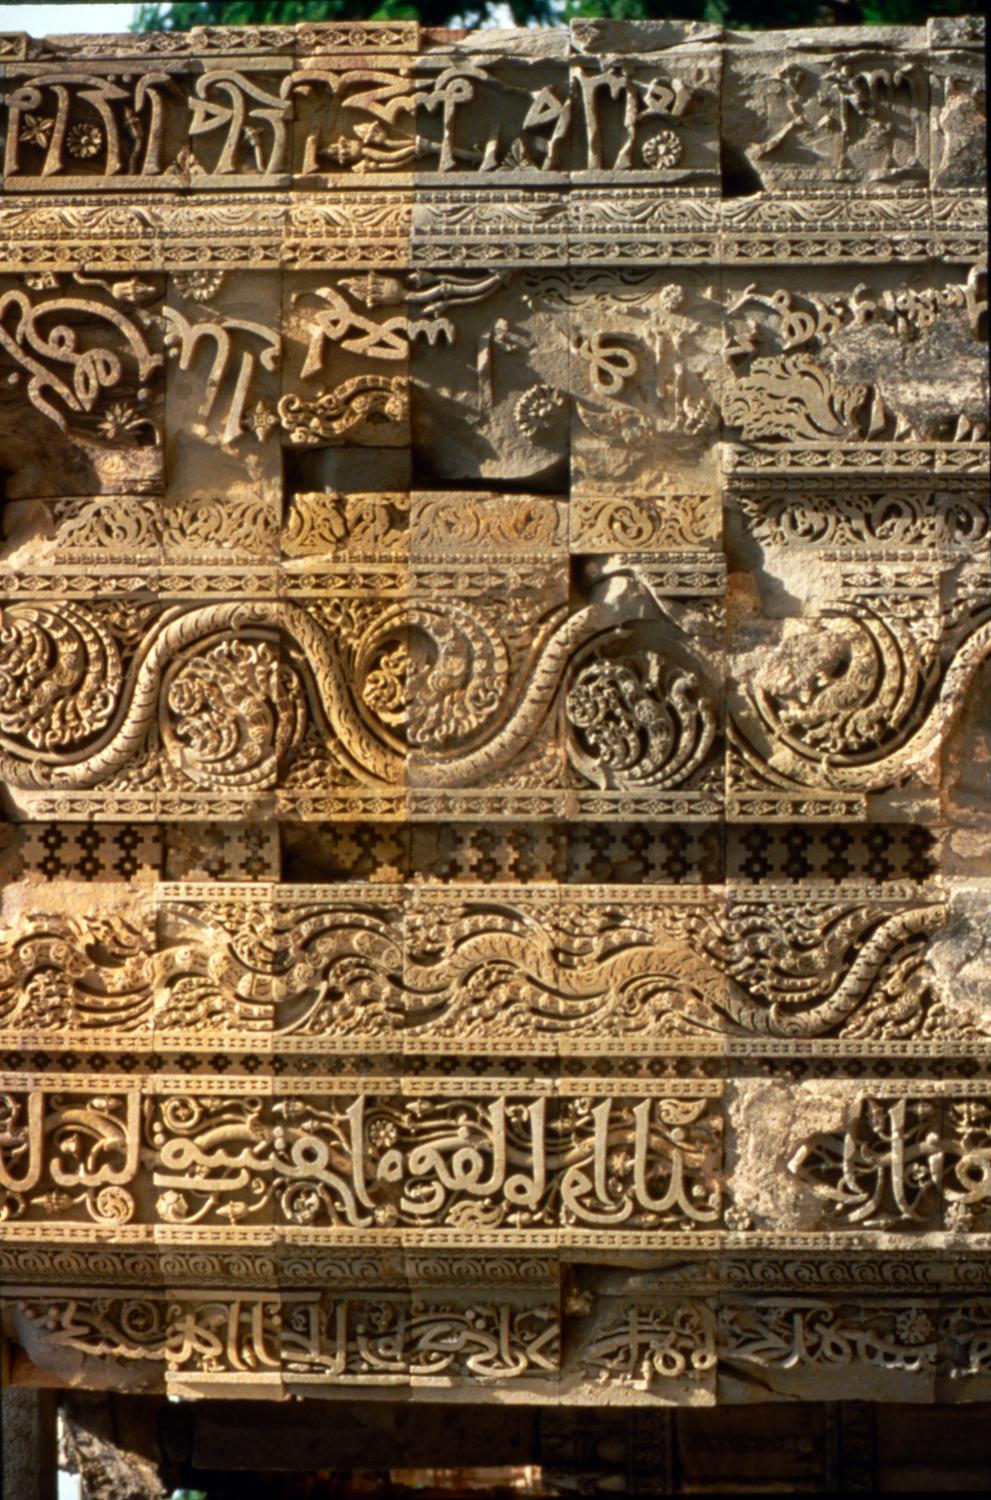 Exterior detail of stone carving of archway, probably for mihrab of great mosque